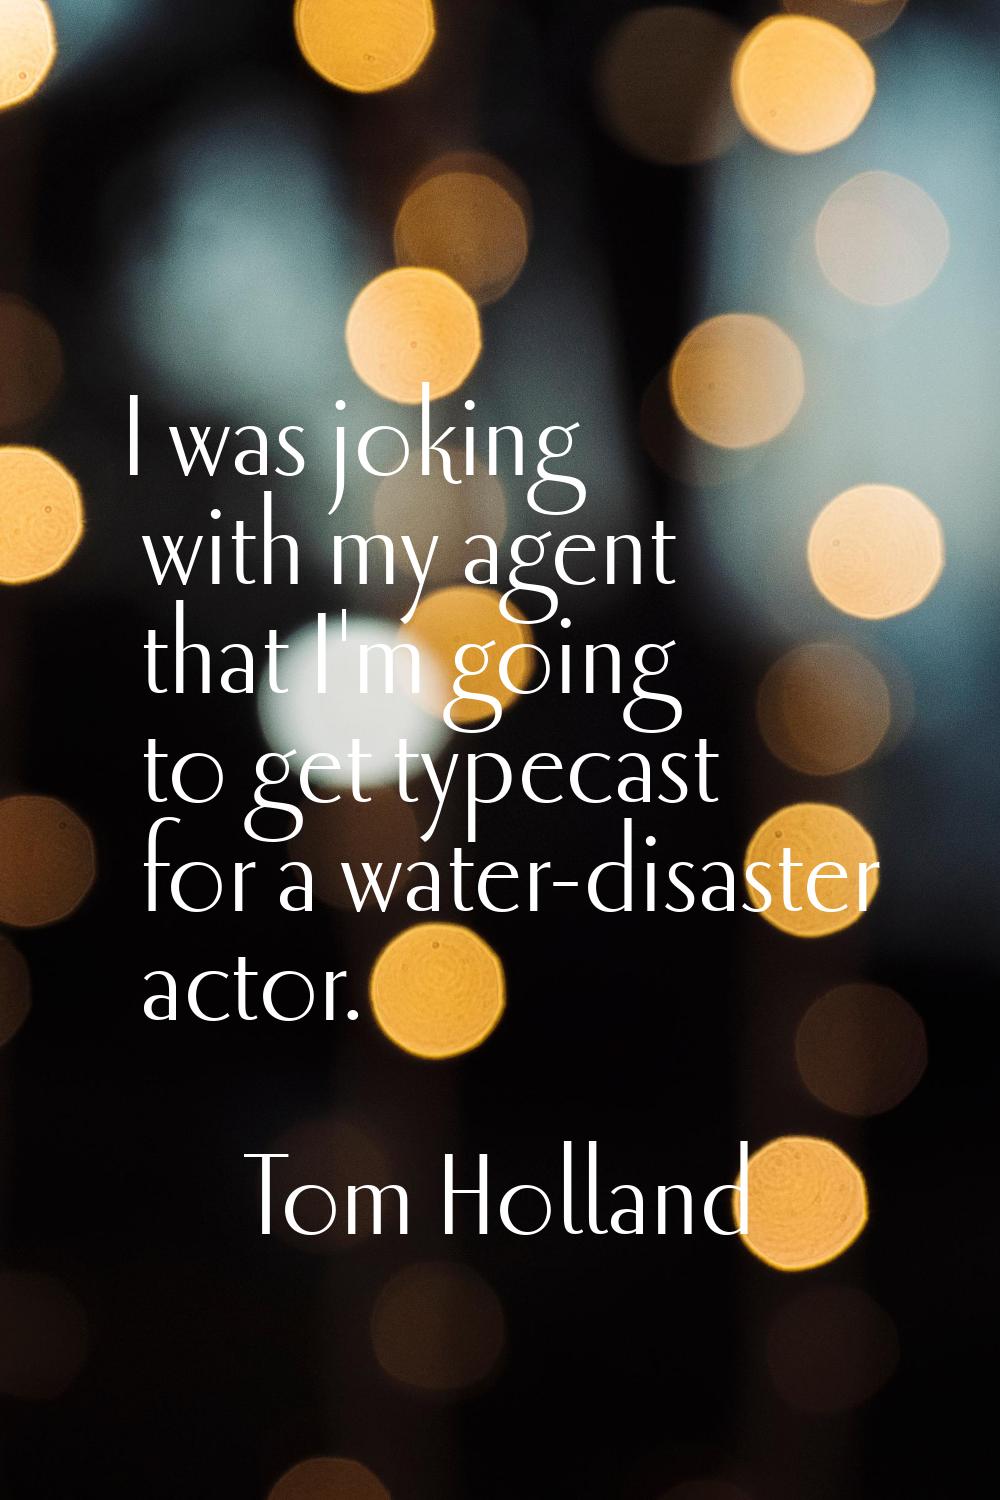 I was joking with my agent that I'm going to get typecast for a water-disaster actor.